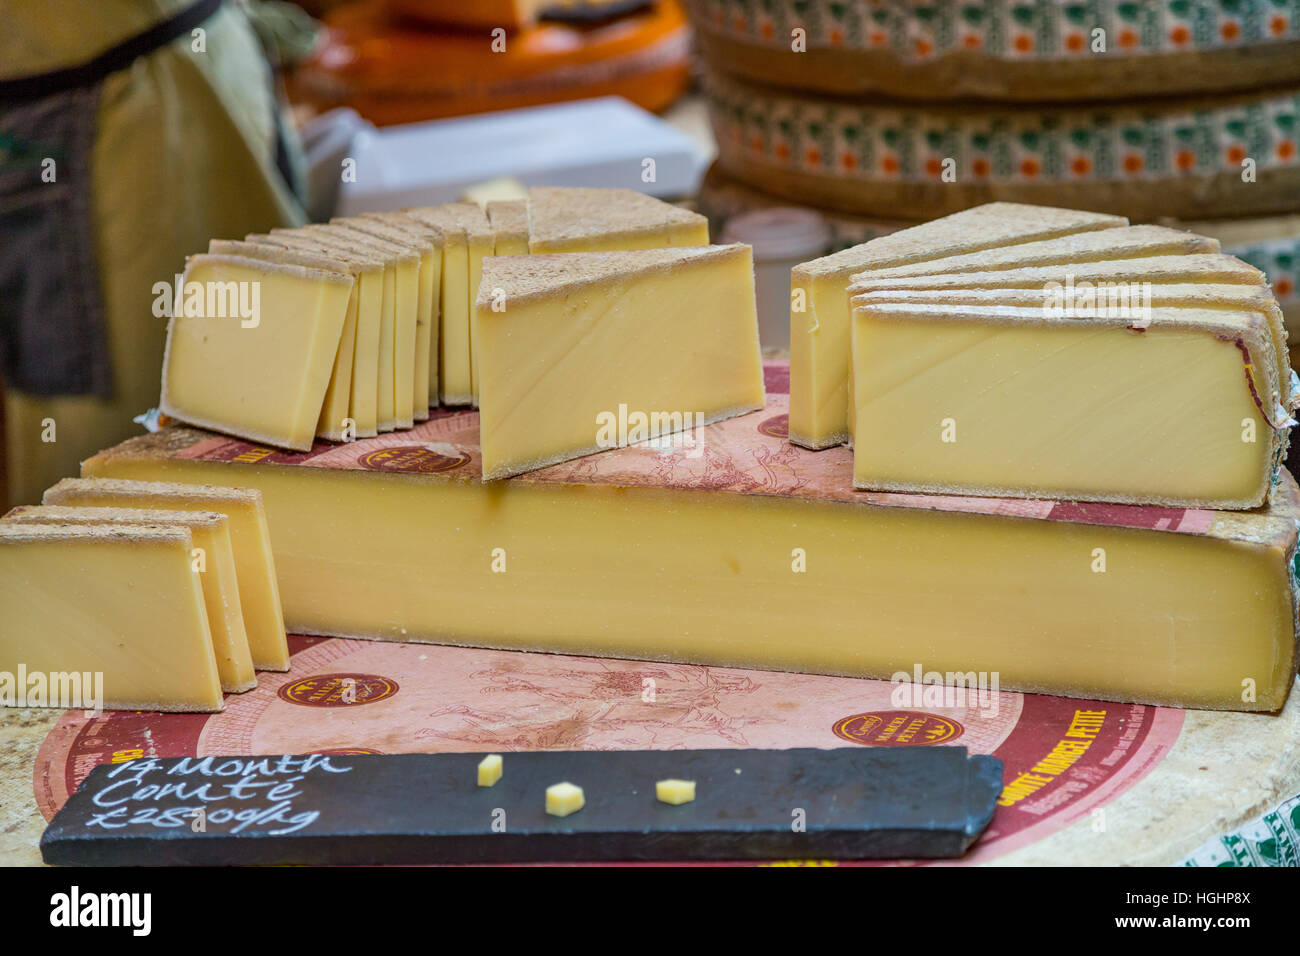 Hard cheeses in a London market Stock Photo